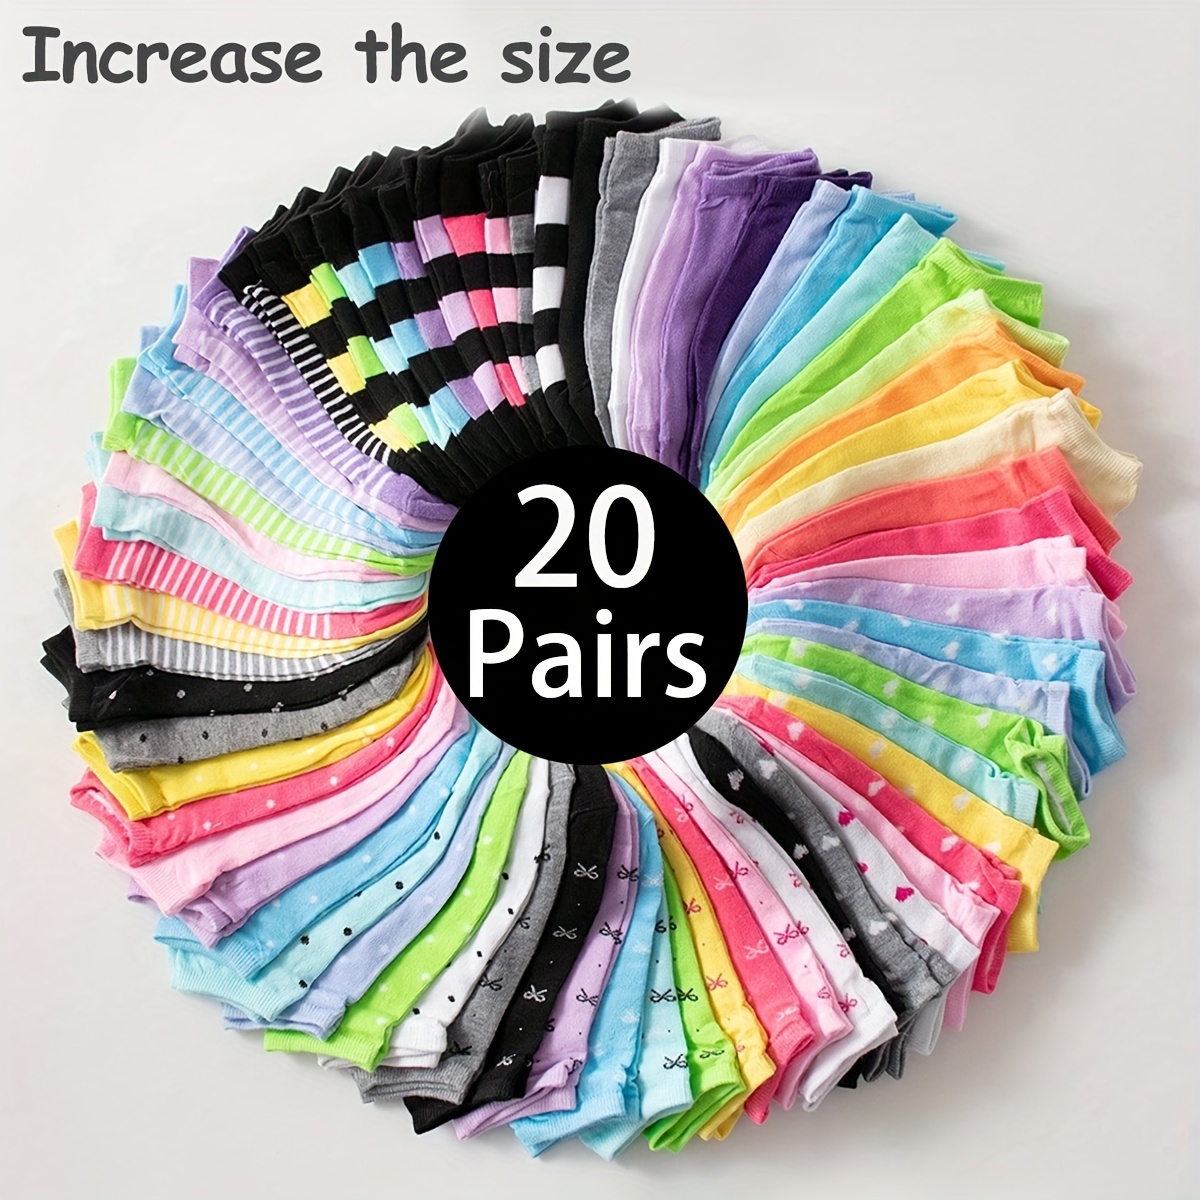 

10/20 Pairs Of Boy's & Girl's Trendy Simple Low-cut Socks, Mesh Candy Colored Breathable Socks For Teenager Outdoor Wearing All Seasons Wearing